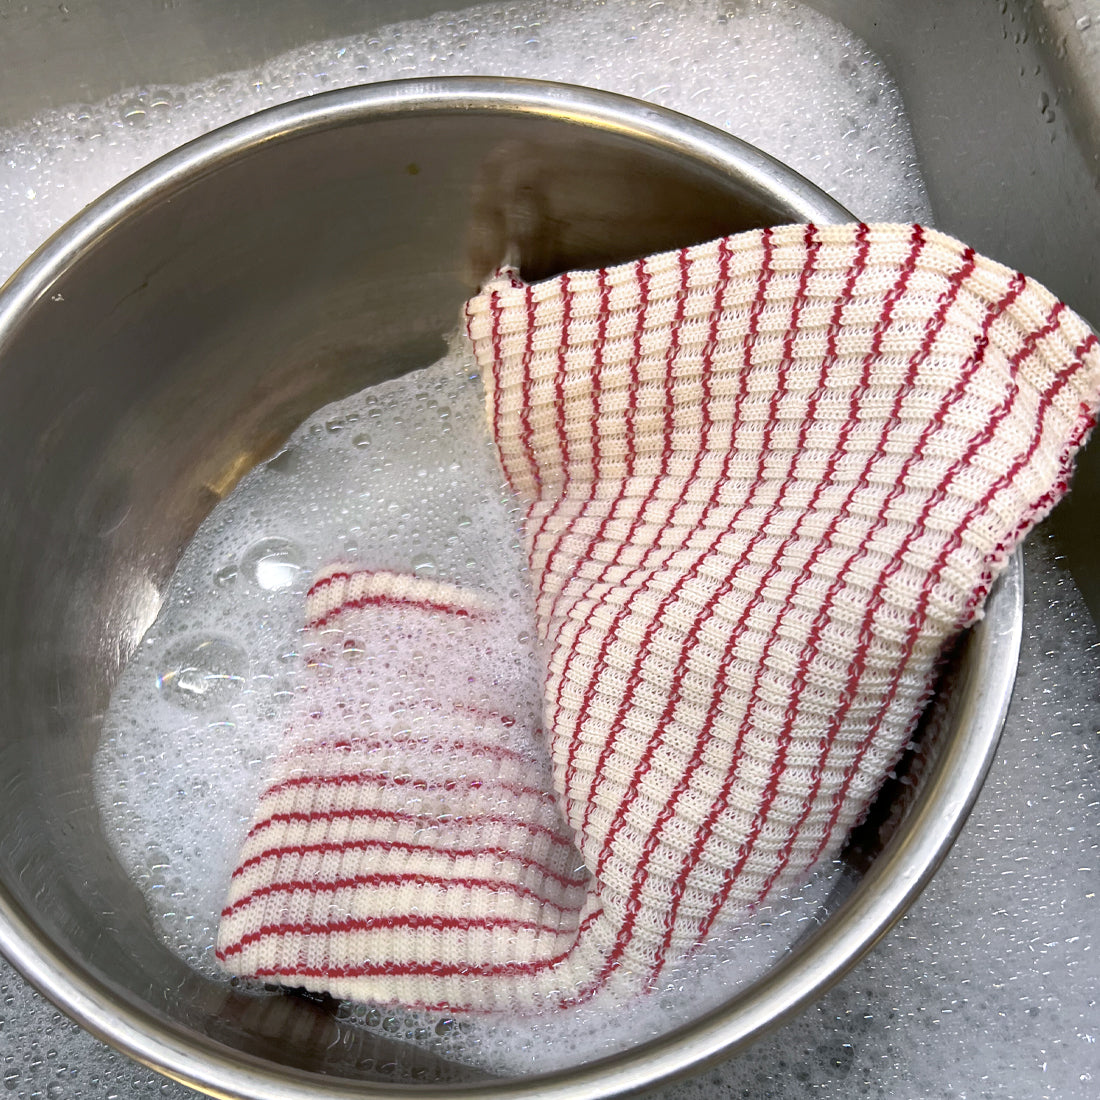 Dish Cloths Should Only Be Used For One Thing, And Washed Often